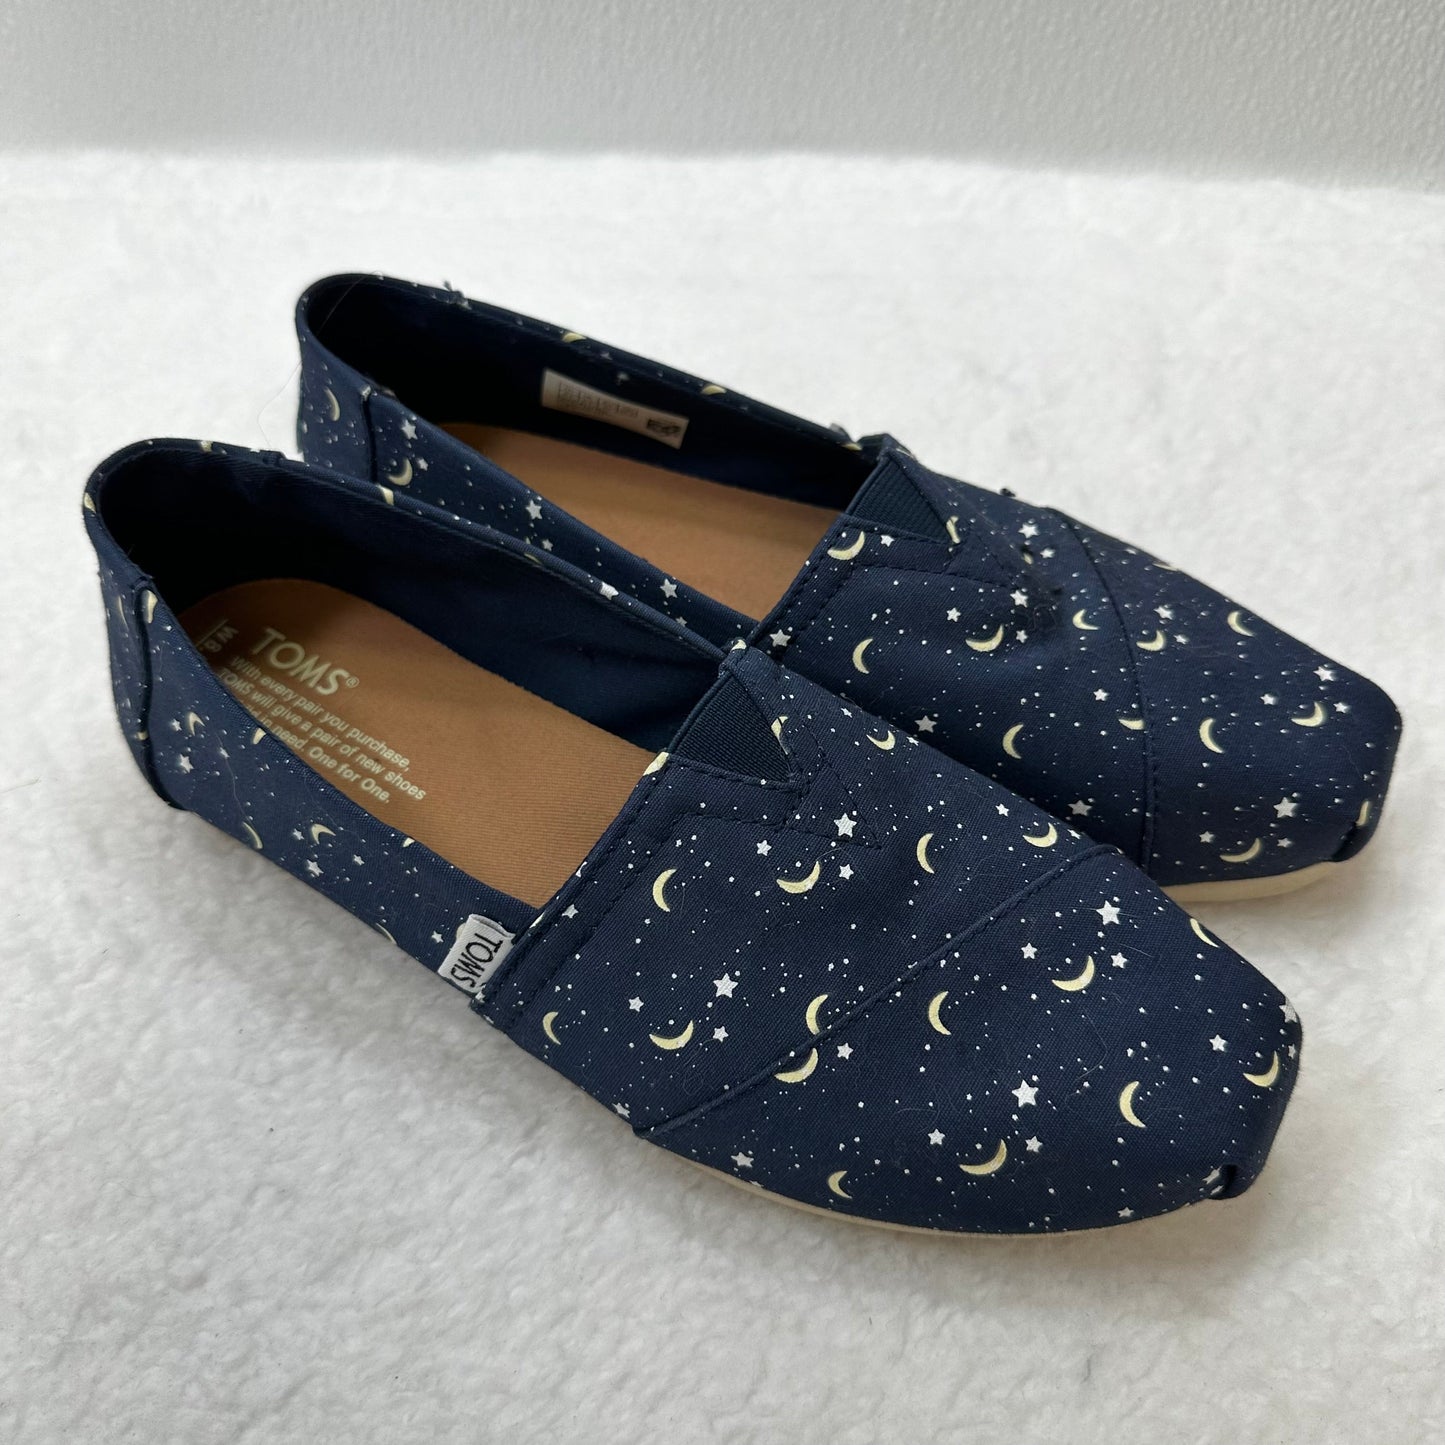 Print Shoes Flats Loafer Oxford Toms, Size 8.5